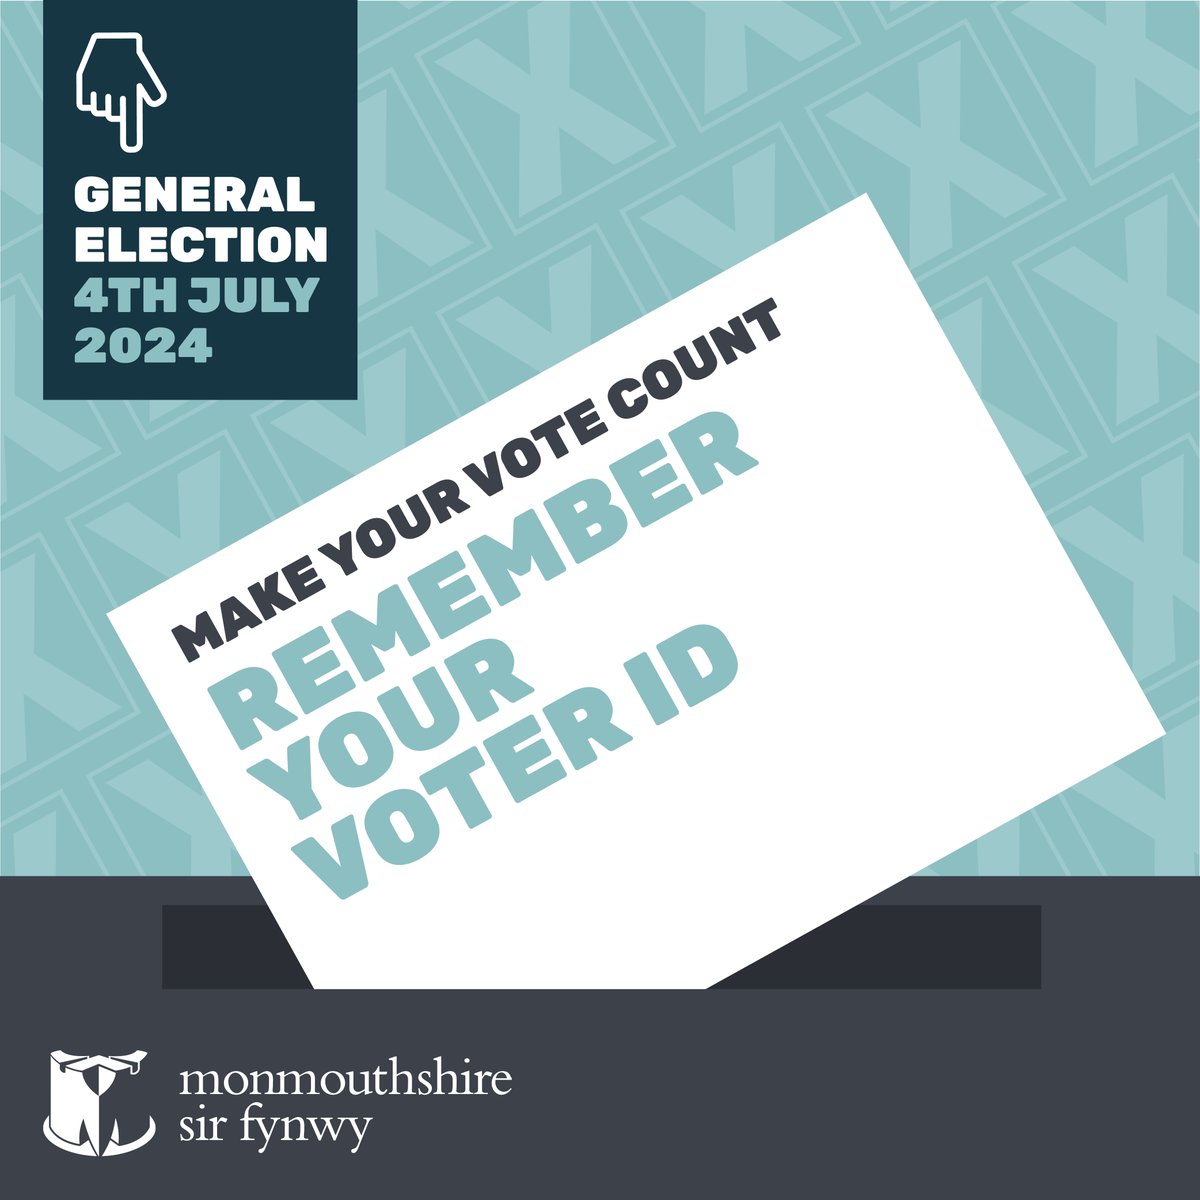 📣 General election called for 4th July. You will need to bring photo ID with you to vote. Find out about voter ID here 👉 monmouthshire.gov.uk/voter-id/ Don’t have voter ID? You can apply for a certificate online here 👉 gov.uk/apply-for-phot…